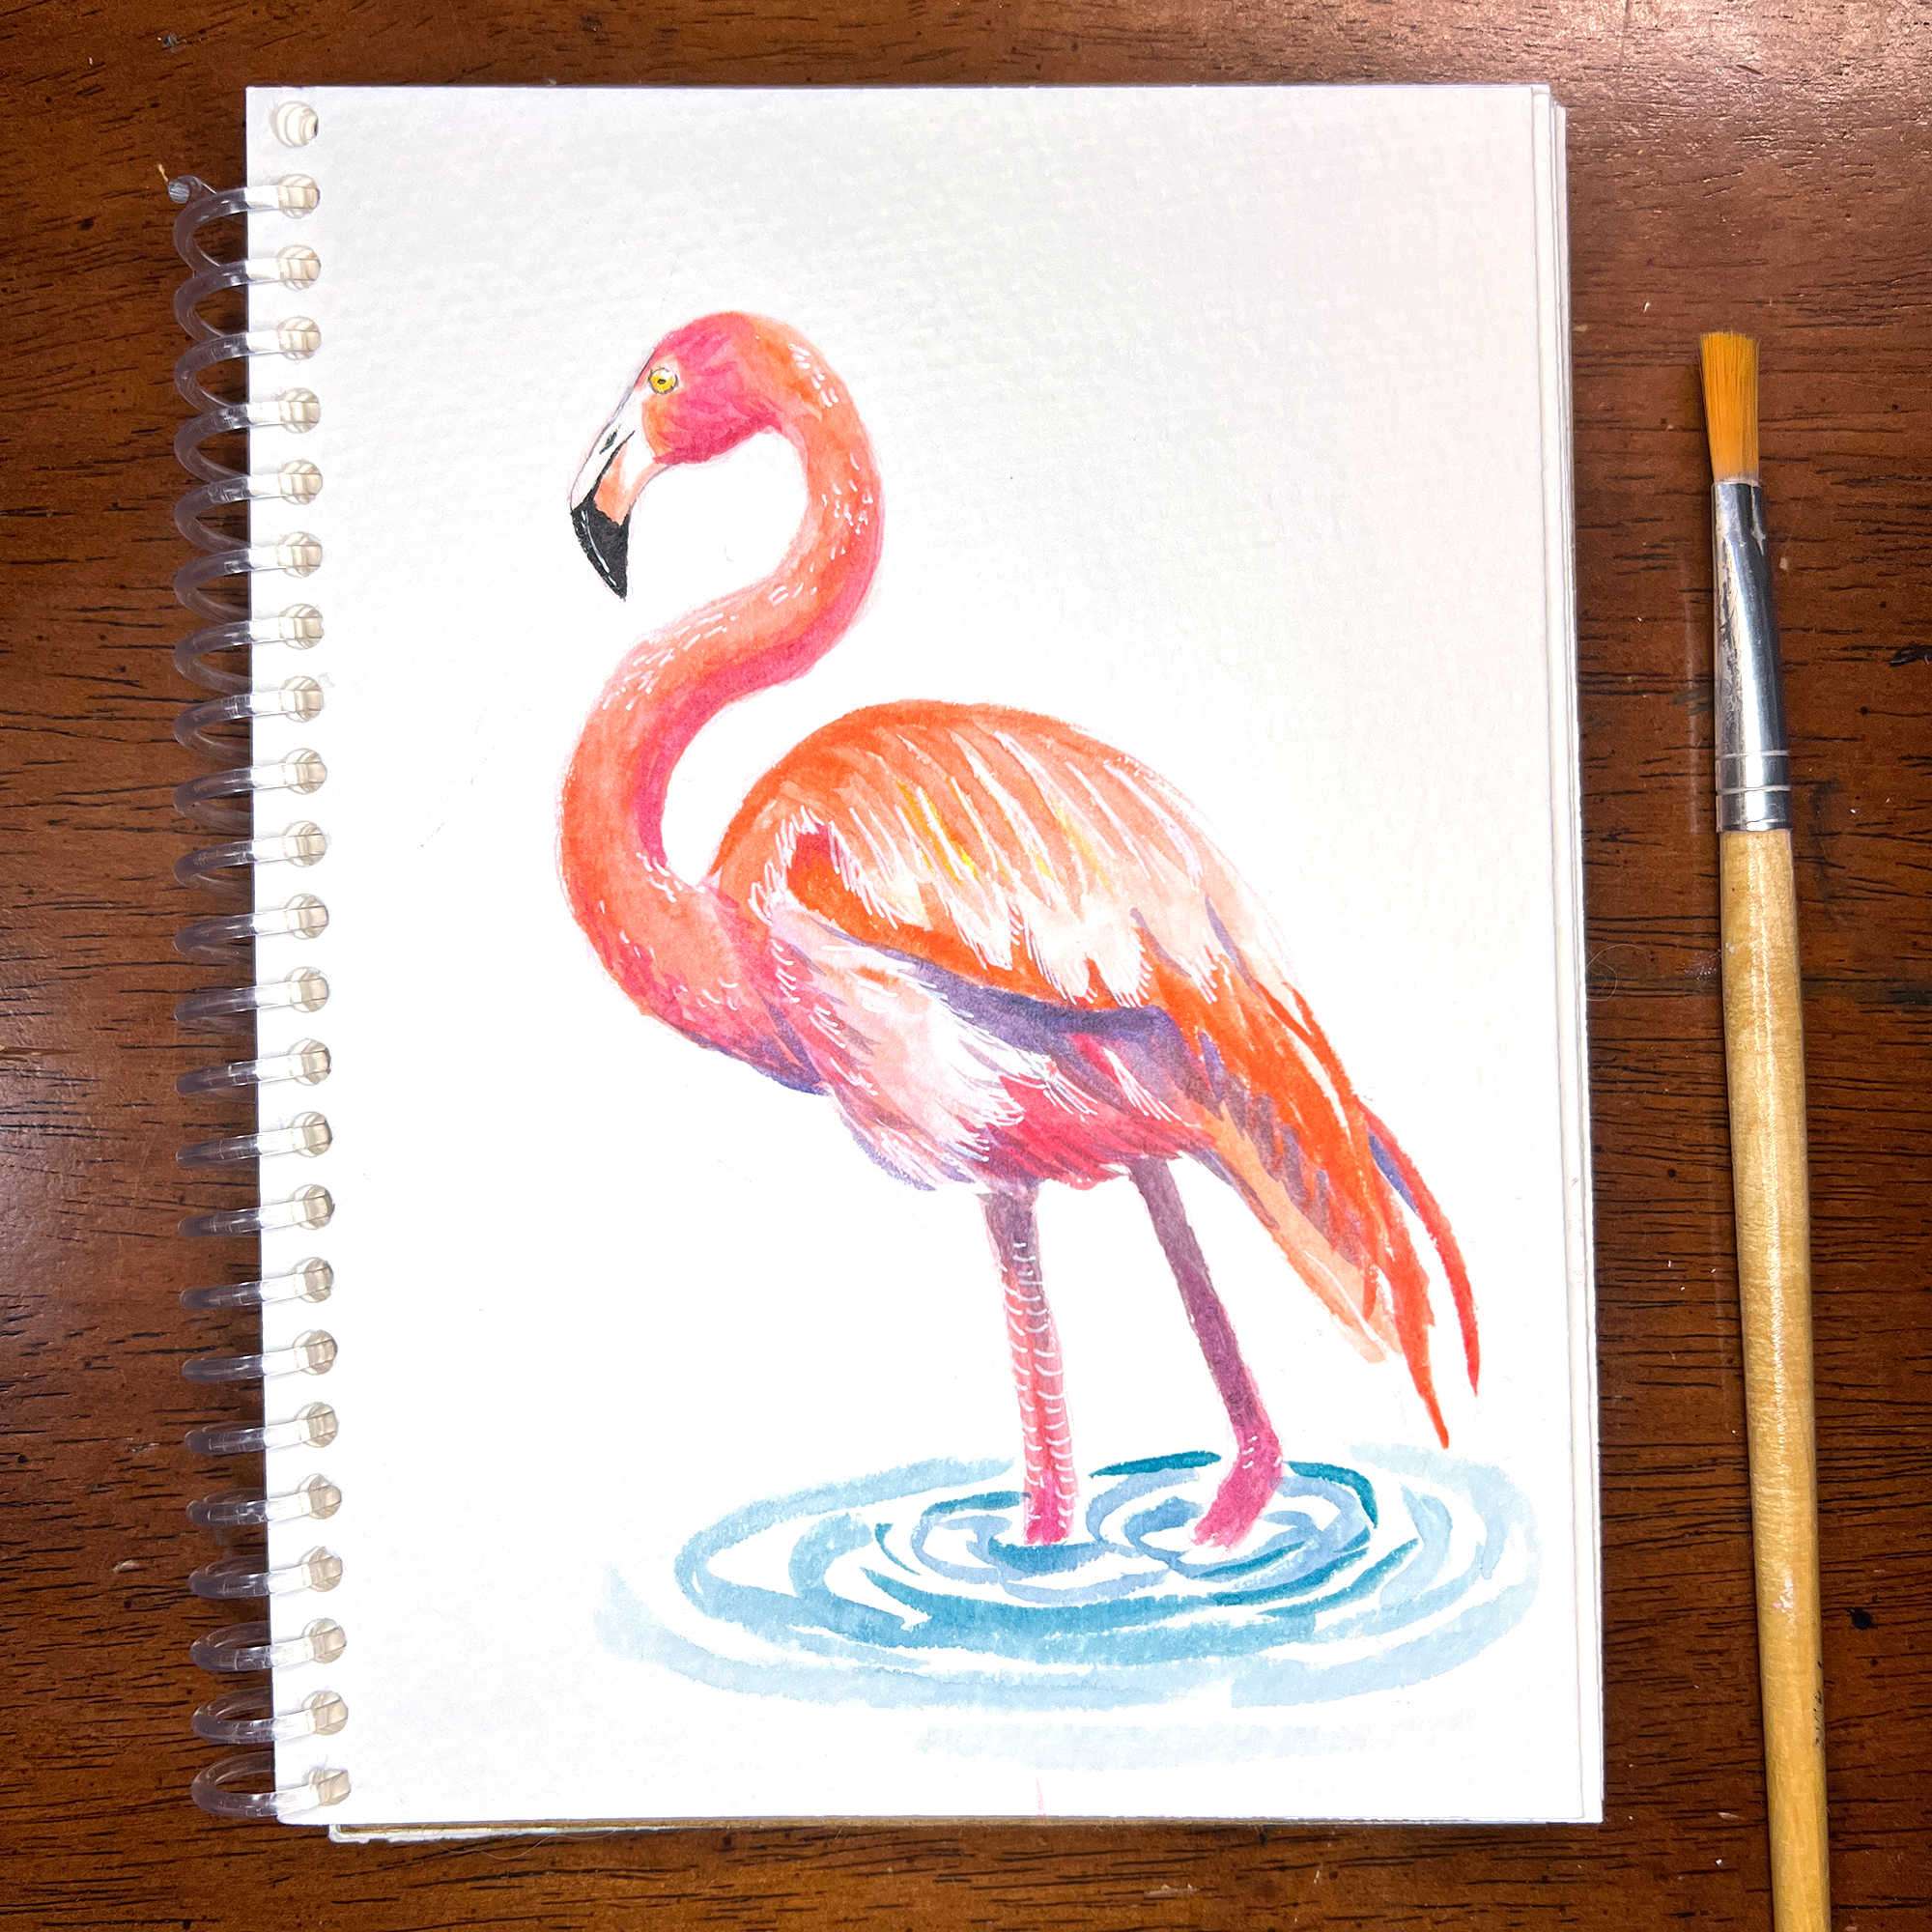 Flamingo watercolor painting on a sketch pad with a brush beside it.